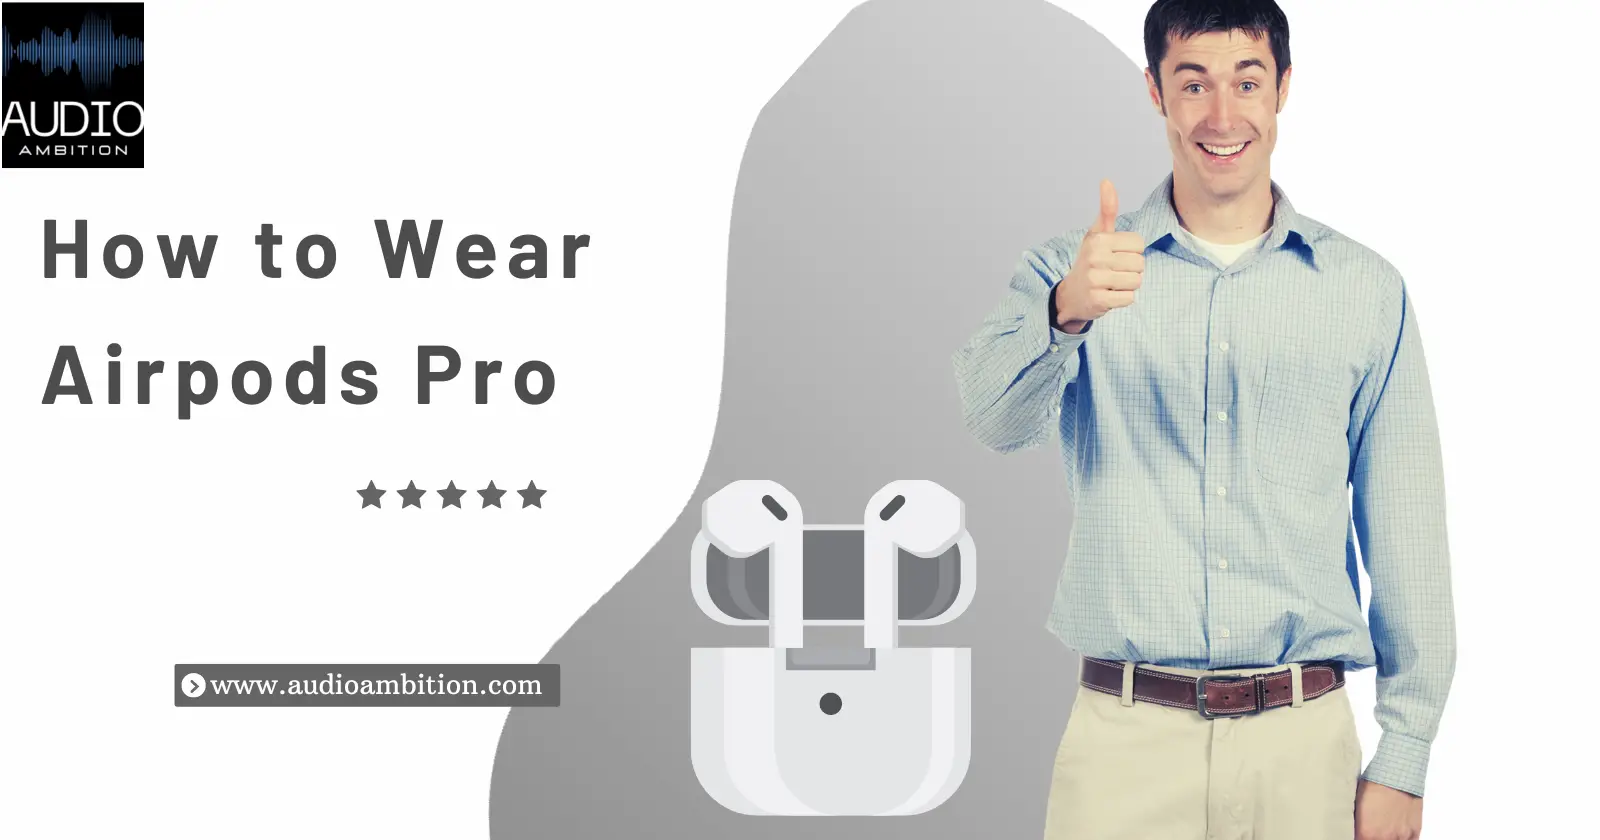 How to Wear Airpods Pro